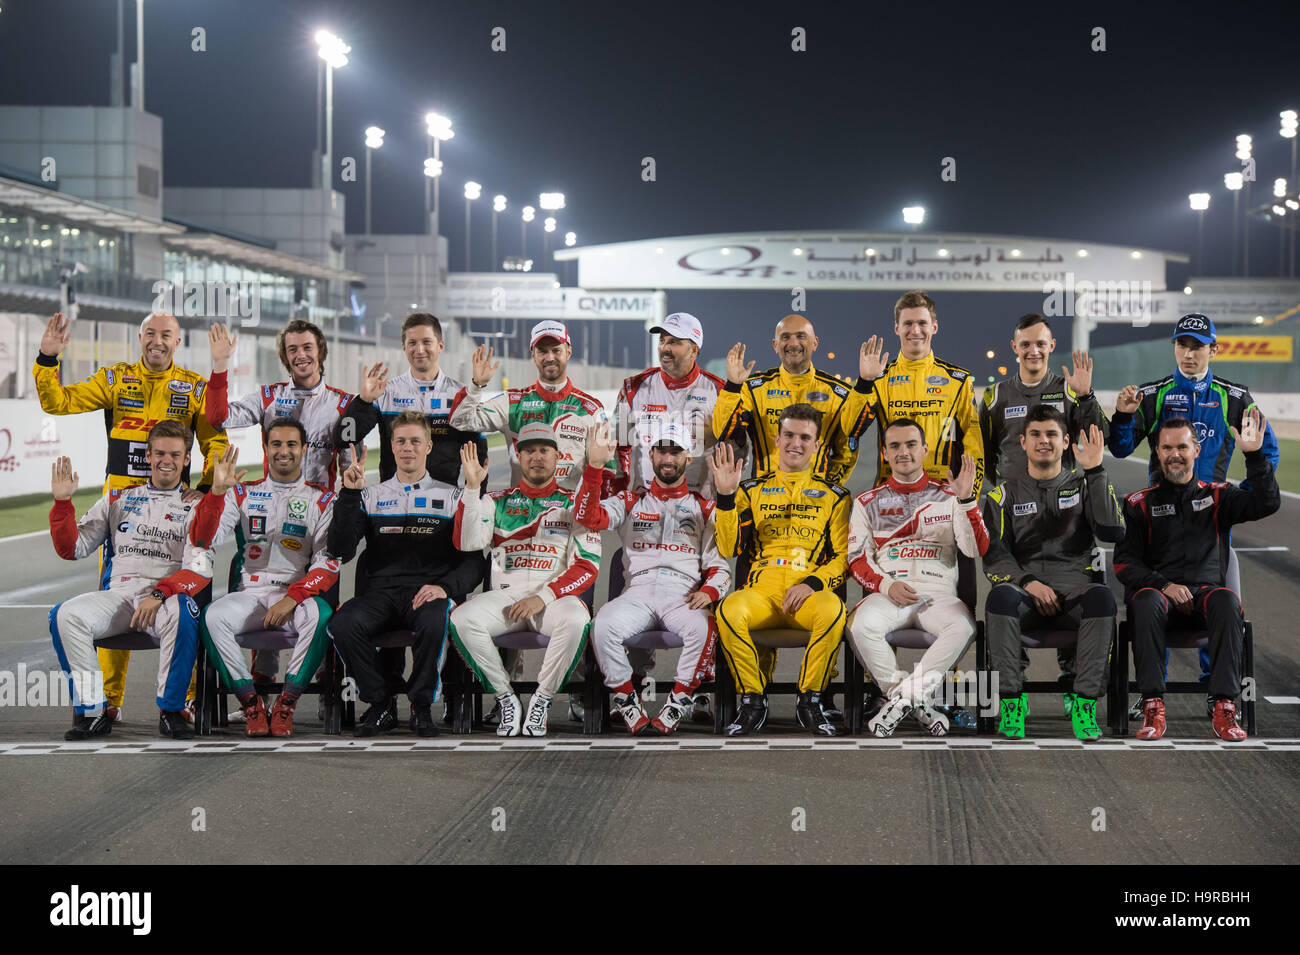 Losail International Circuit, Qatar. 24th Nov, 2016. The drivers pose for  group photo before the final round of the WTCC Credit:  Tom Morgan/Alamy Live News Stock Photo